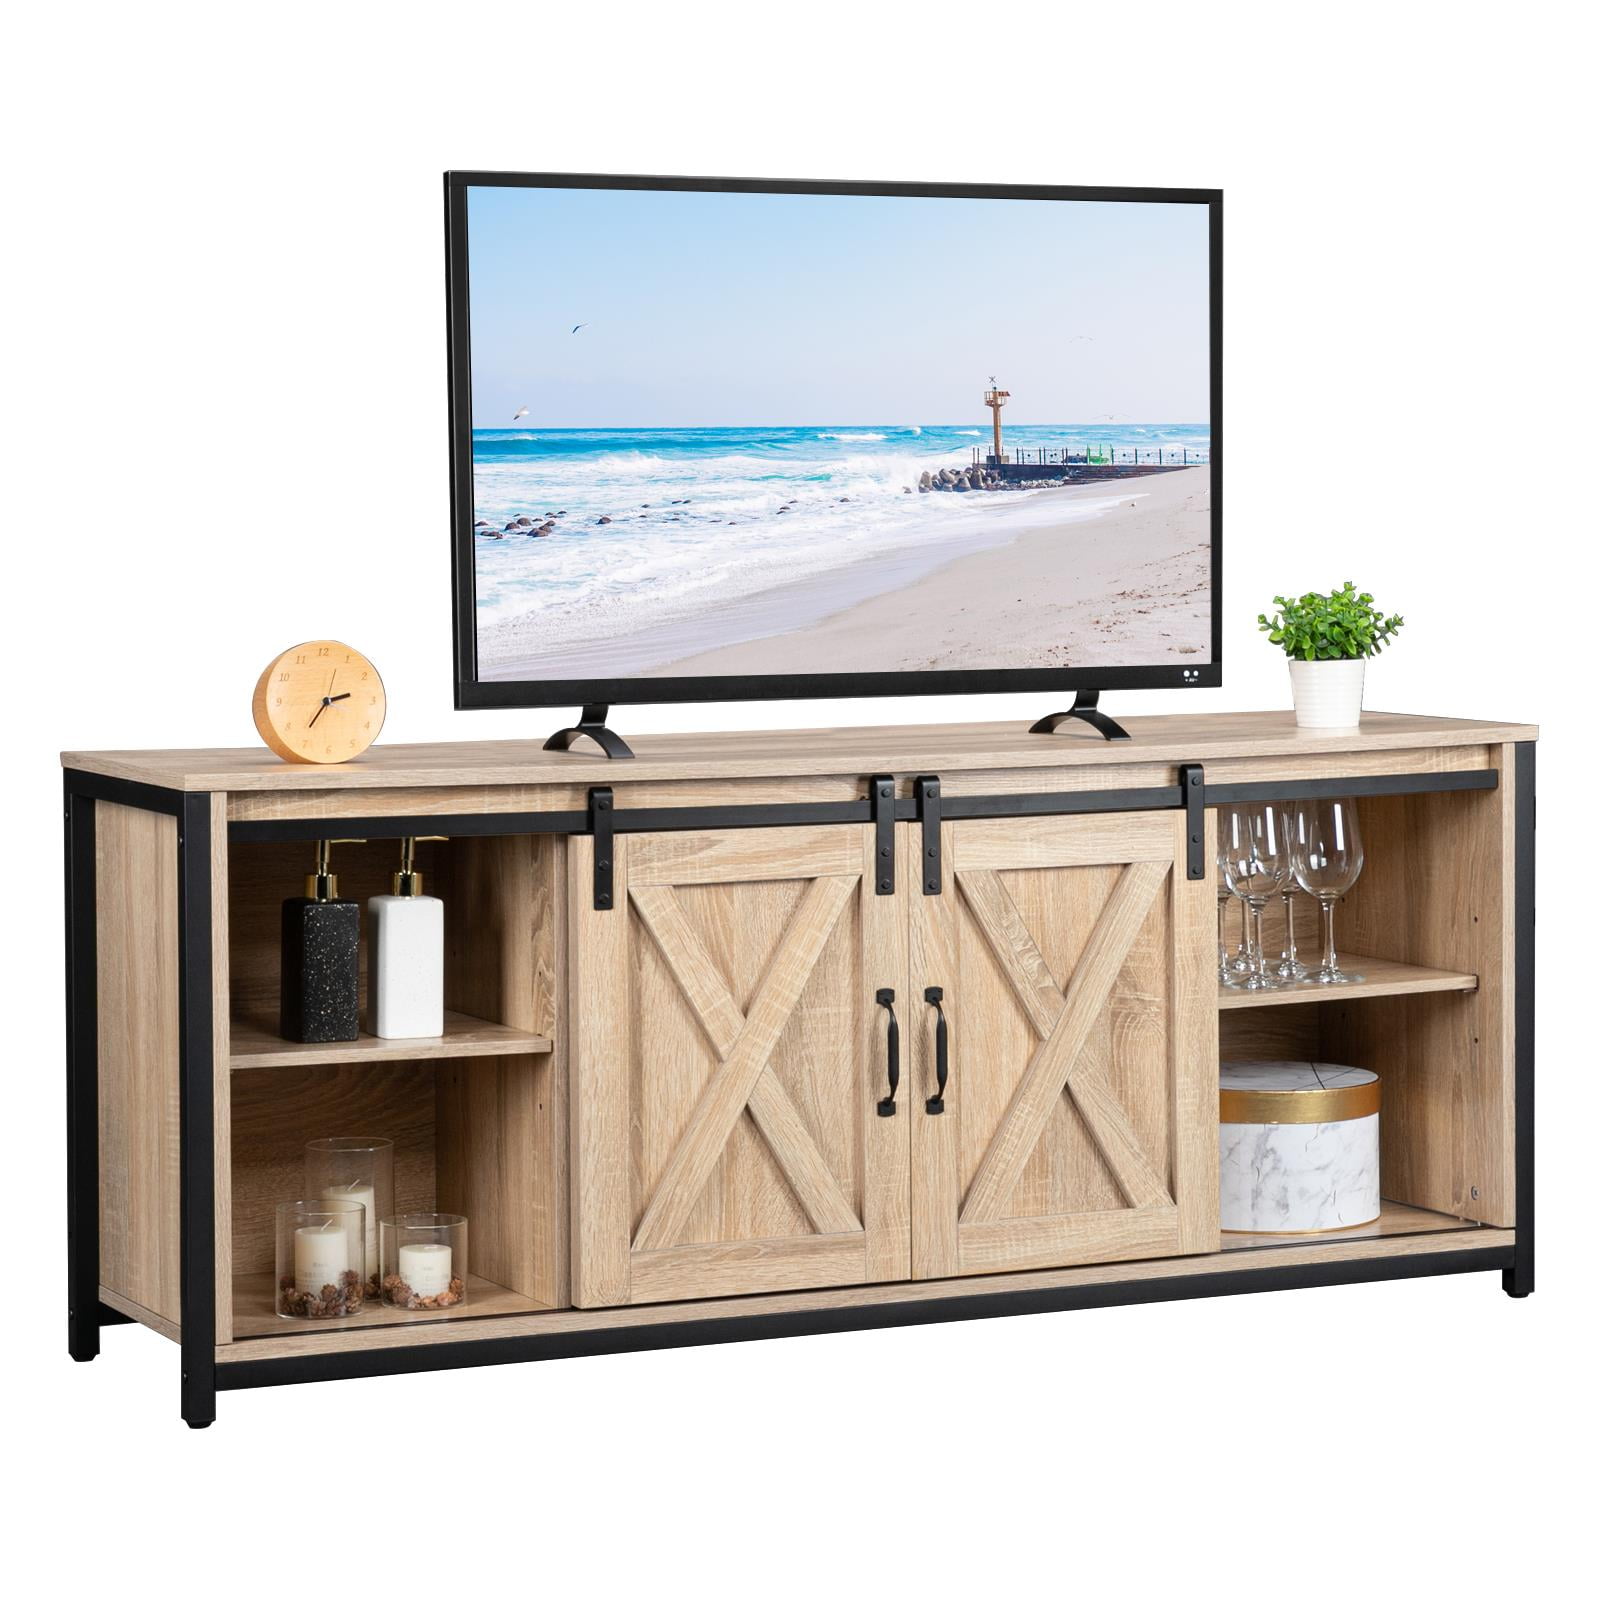 65" TV Stand Entertainment Center for TV's Storage Cabinets w/ Sliding Barn Door 